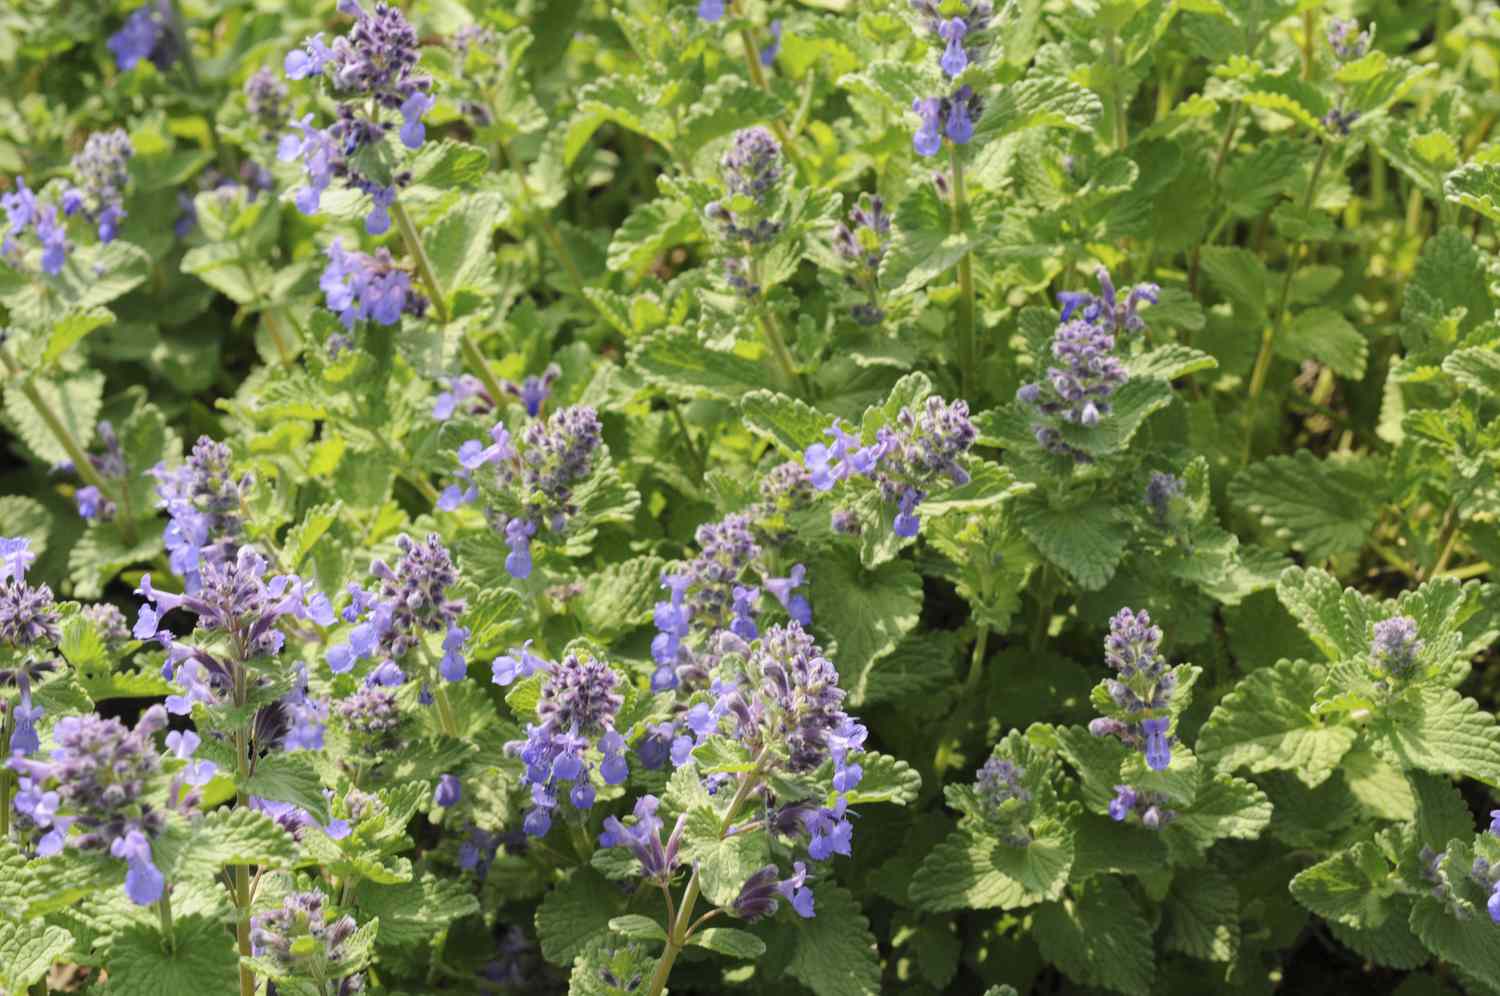 Catmint plants in bloom.